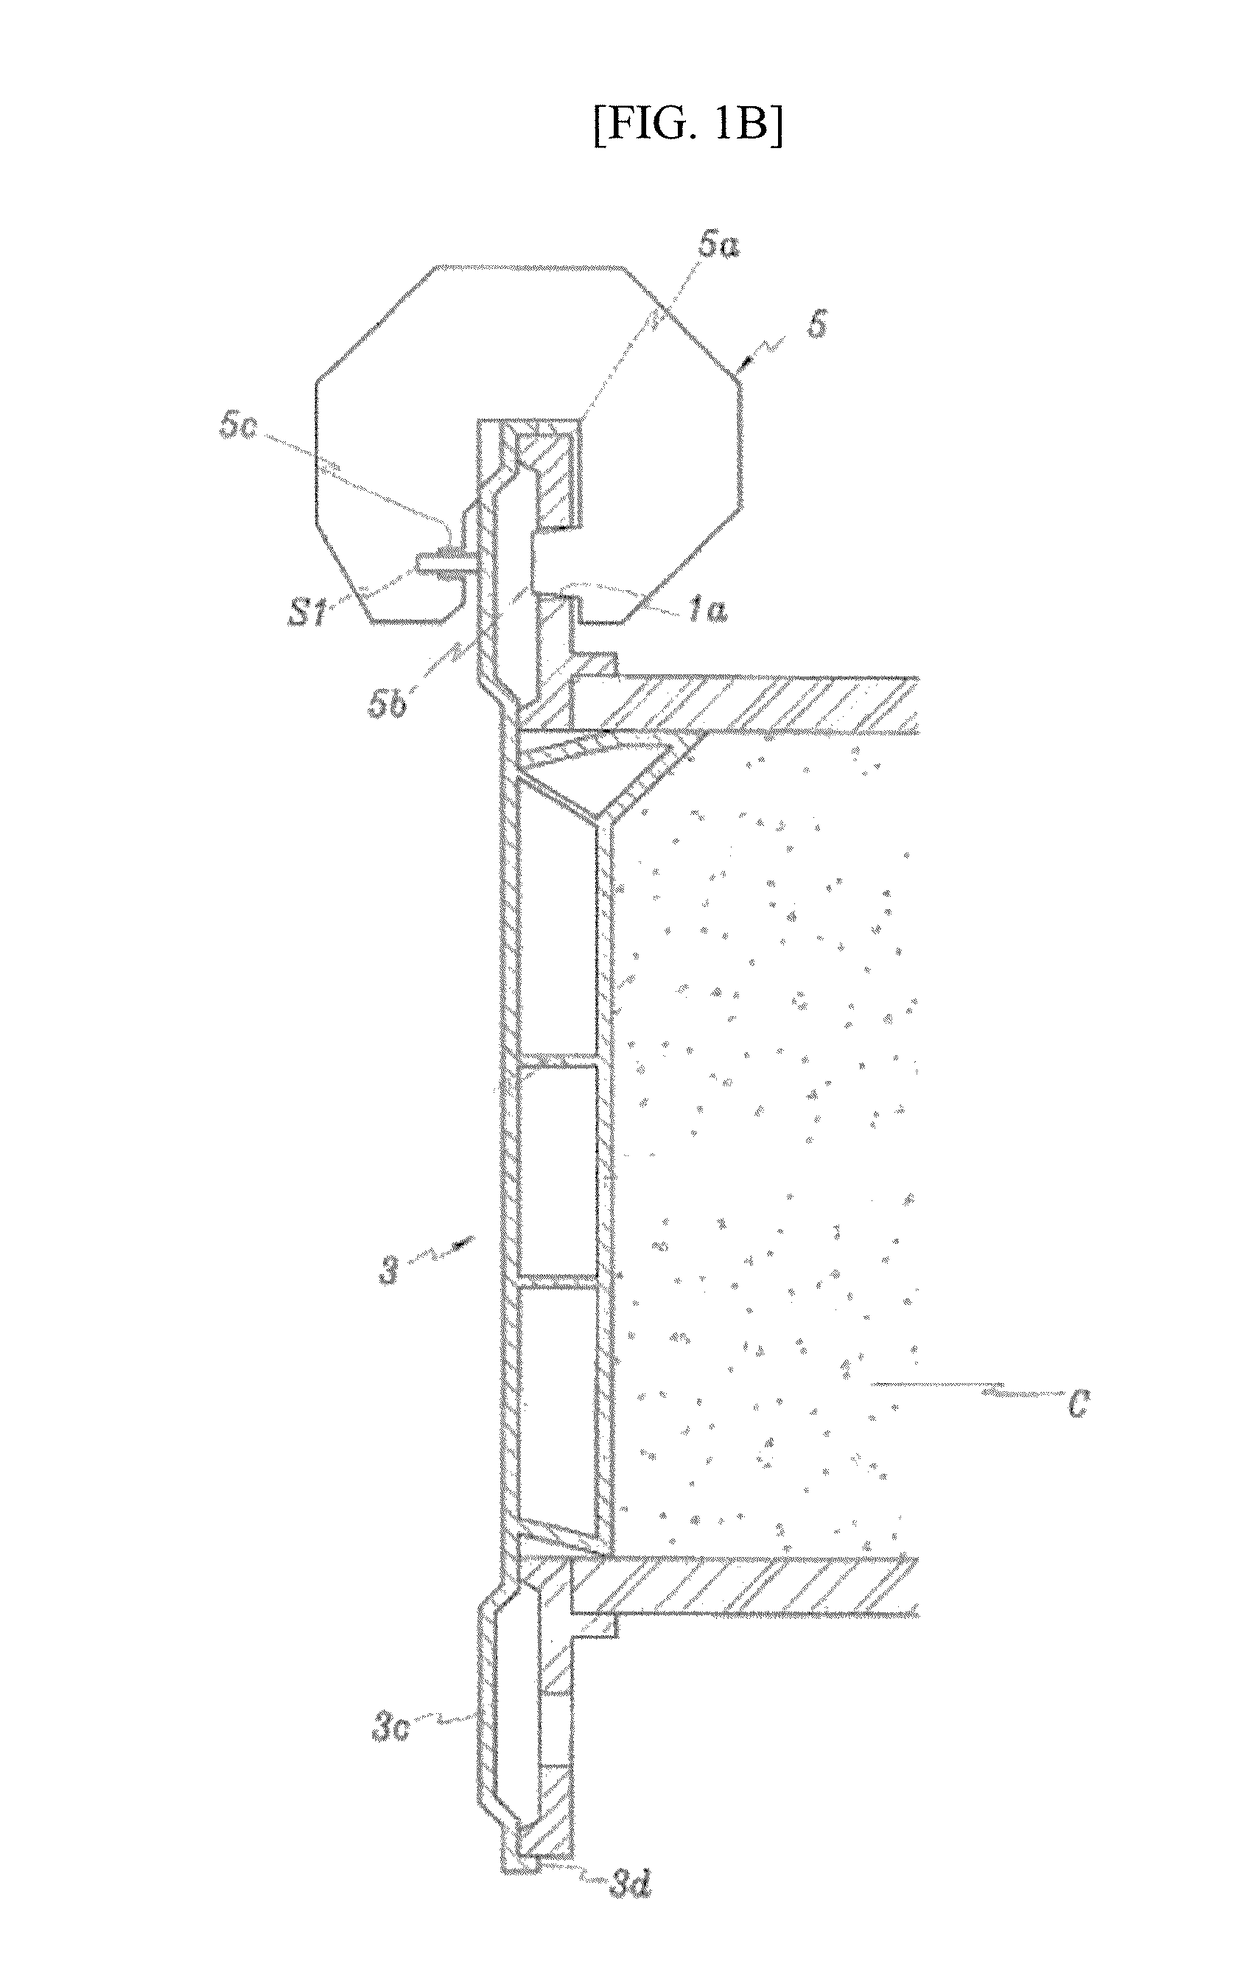 Self-pouring mold system and method of fire-proofing, repairing, and reinforcing using the same